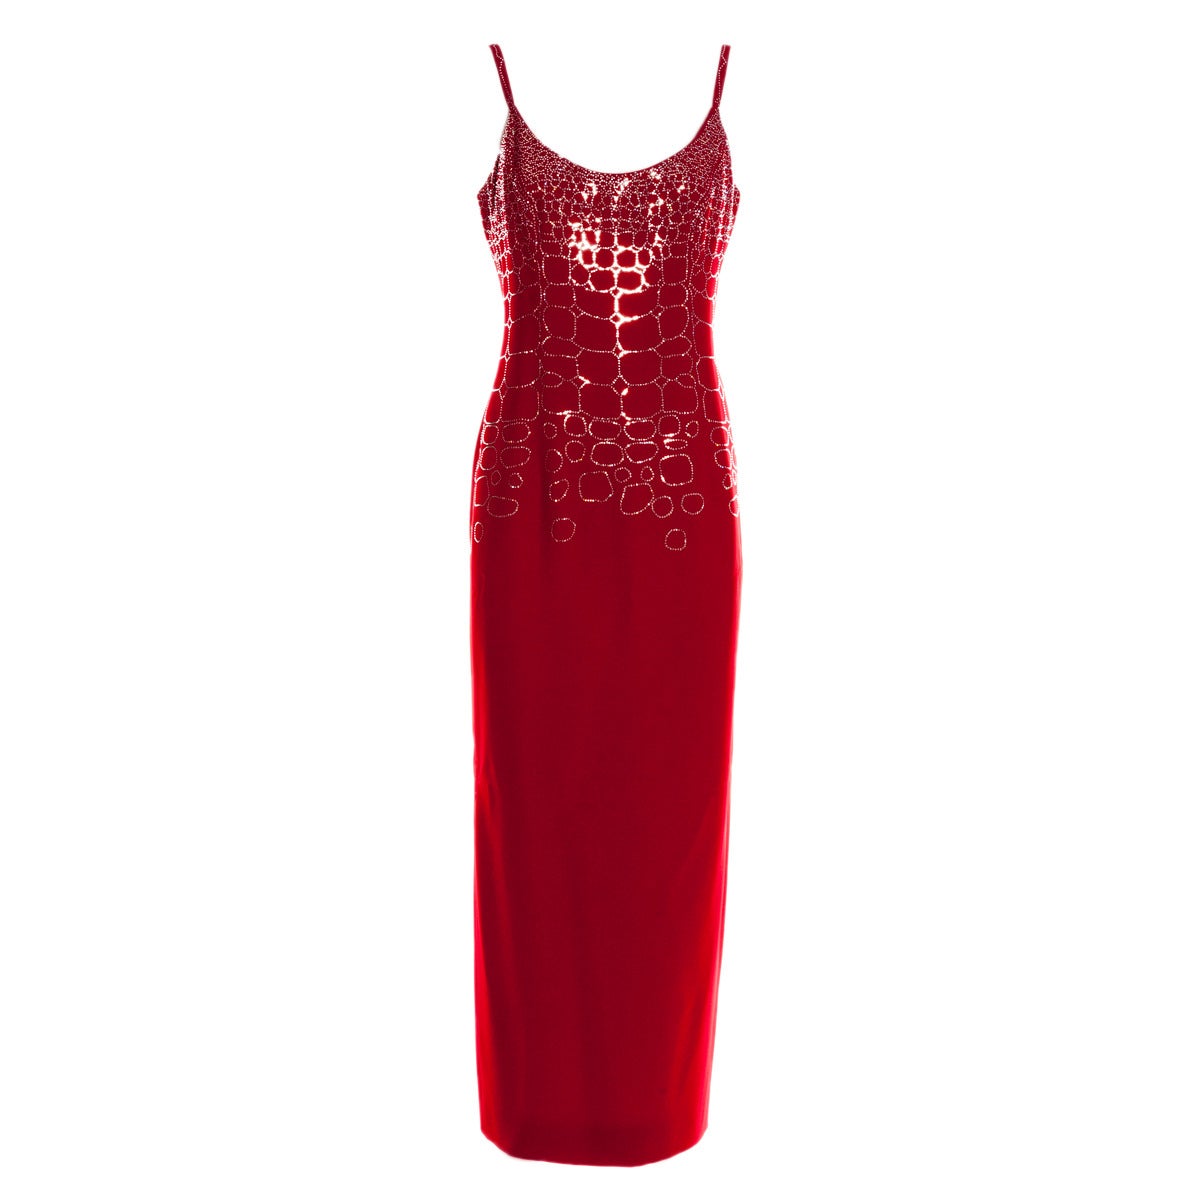 Gai Mattiolo Couture Red Evening Crystals Dress